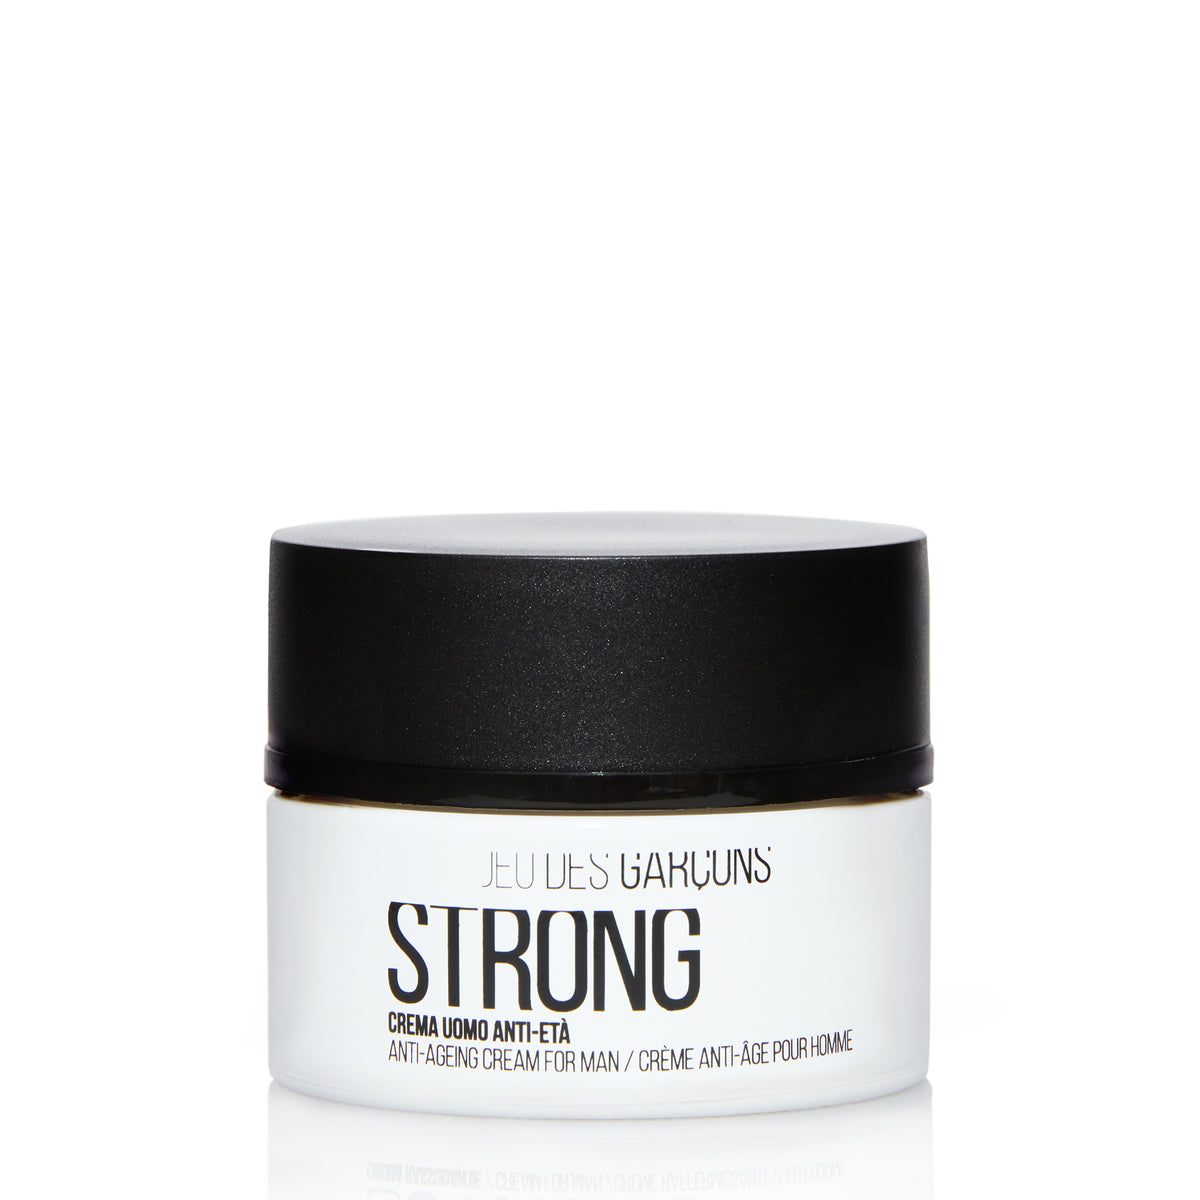 STRONG ANTI-AGEING CREAM FOR MEN